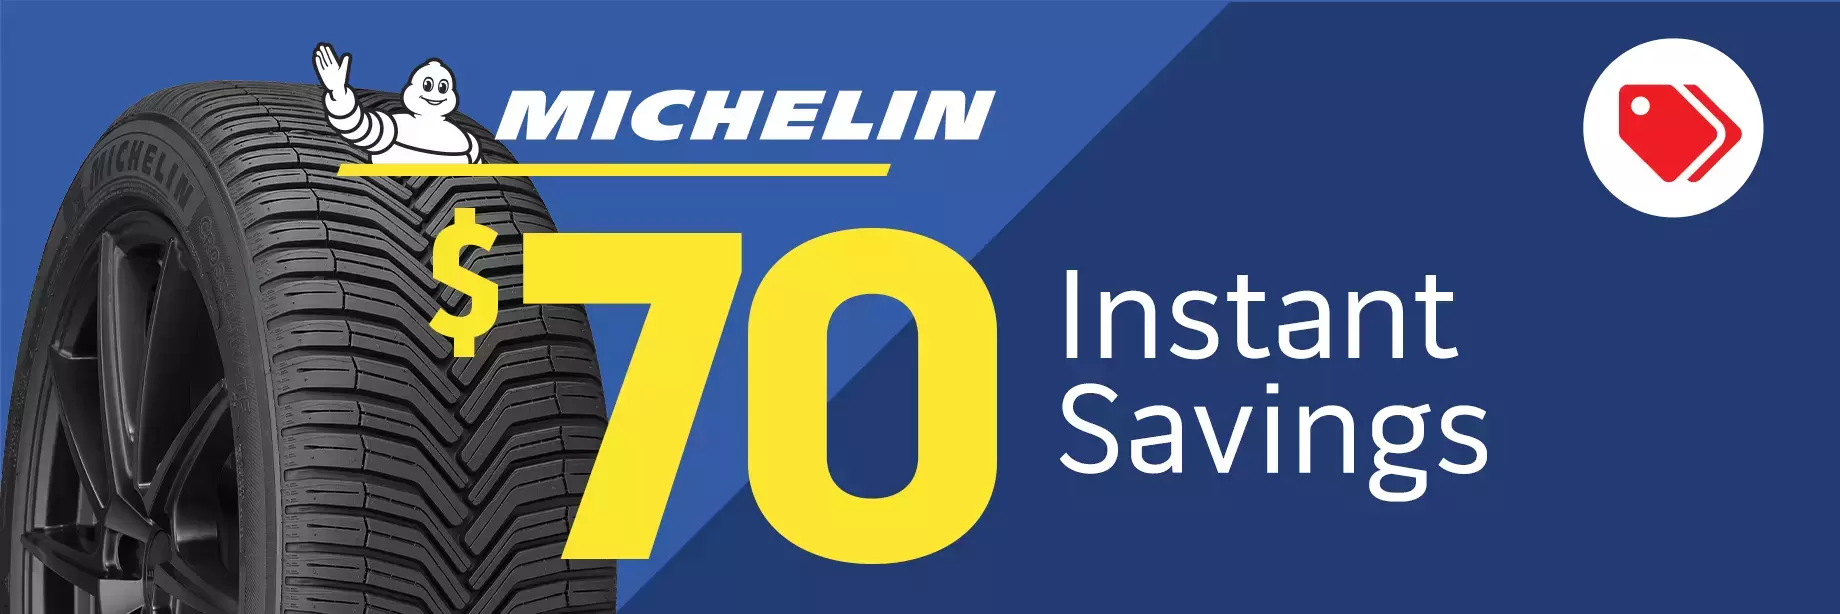 Michelin tire discount for January 2021